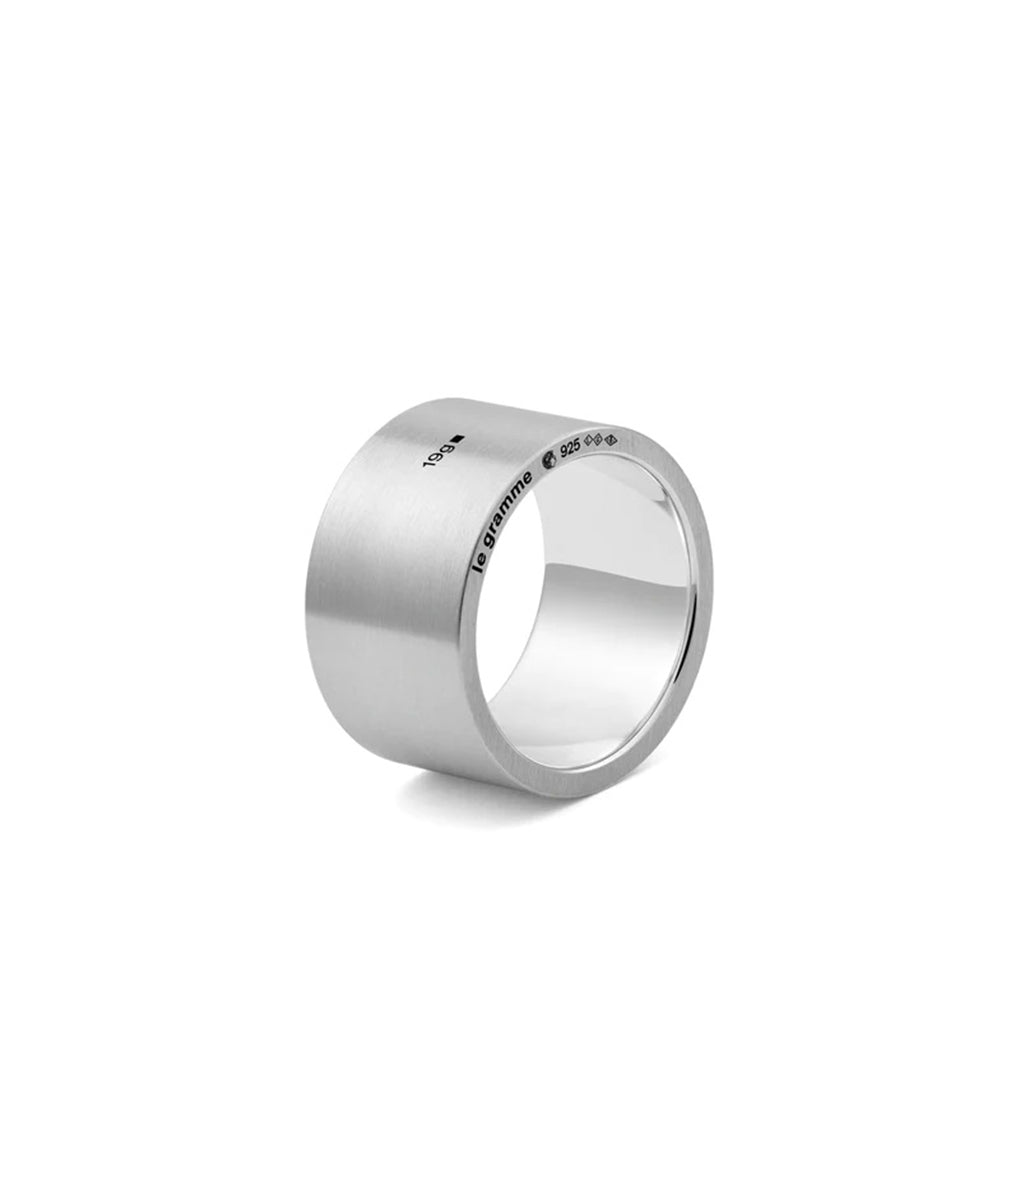 LE GRAMME "19G RIBBON RING BRUSHED"（NEW)